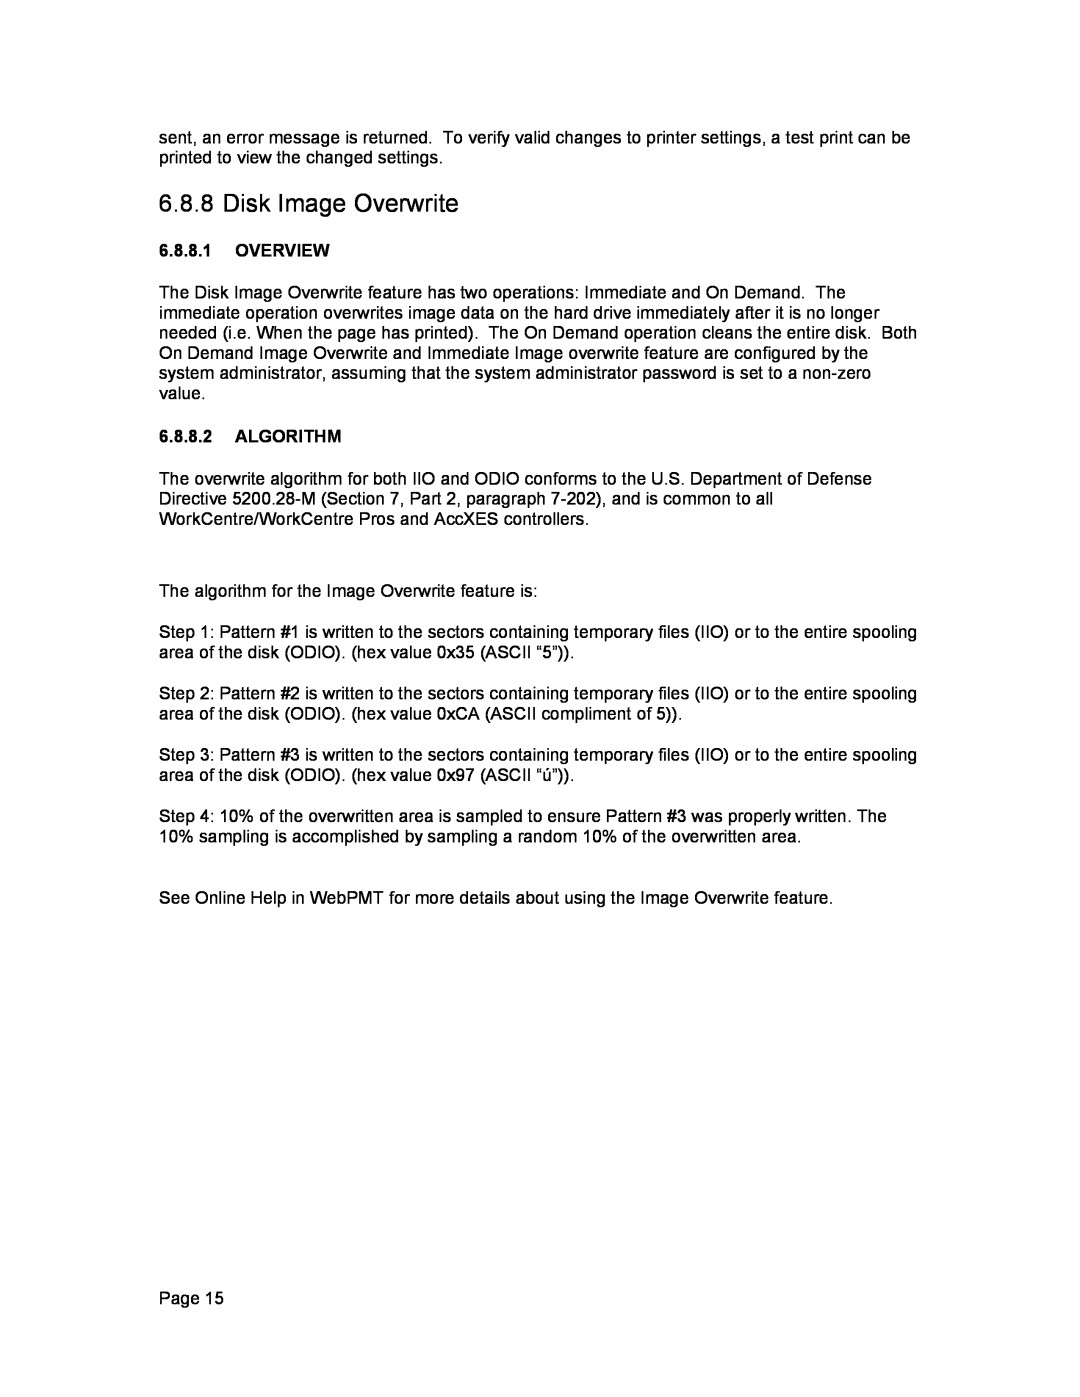 Xerox 12.7 B 114 manual Disk Image Overwrite, 6.8.8.1OVERVIEW, 6.8.8.2ALGORITHM 